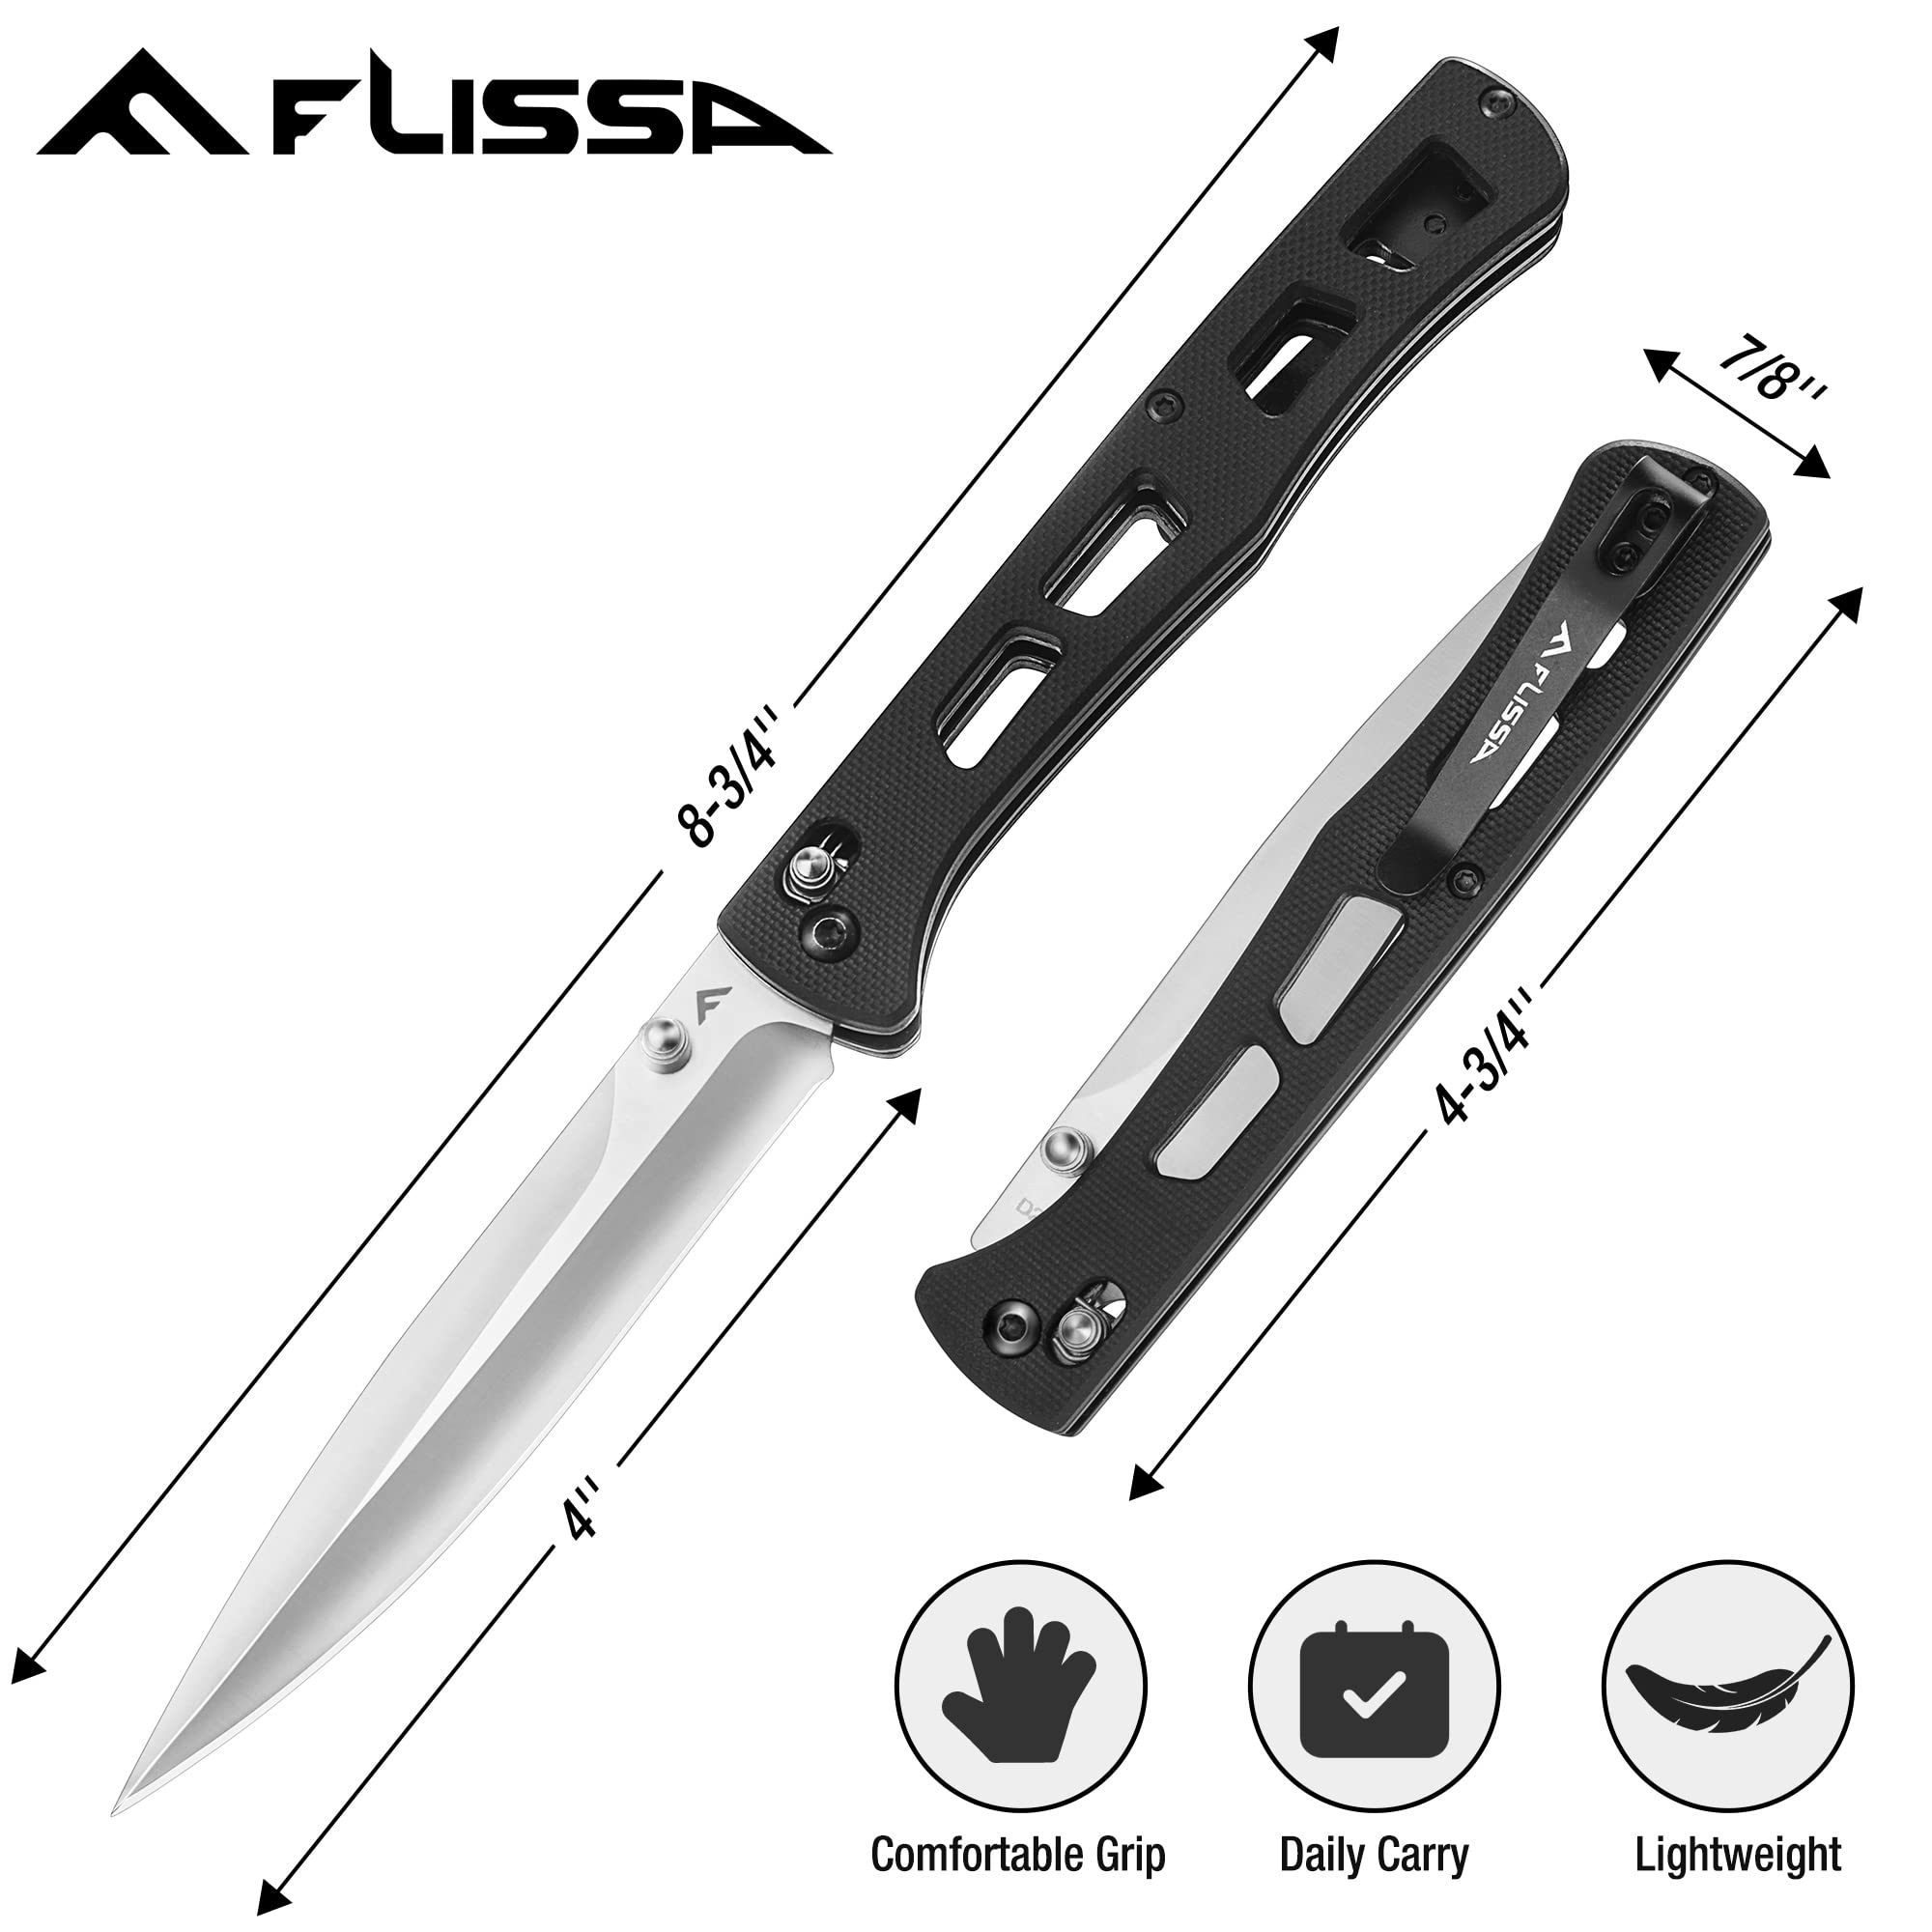 FLISSA Folding Pocket Knife, 4-inch D2 Blade with Thumb Stud, Axis Lock, G10 Handle, EDC Knife for Hiking, Camping, Survival, Outdoor